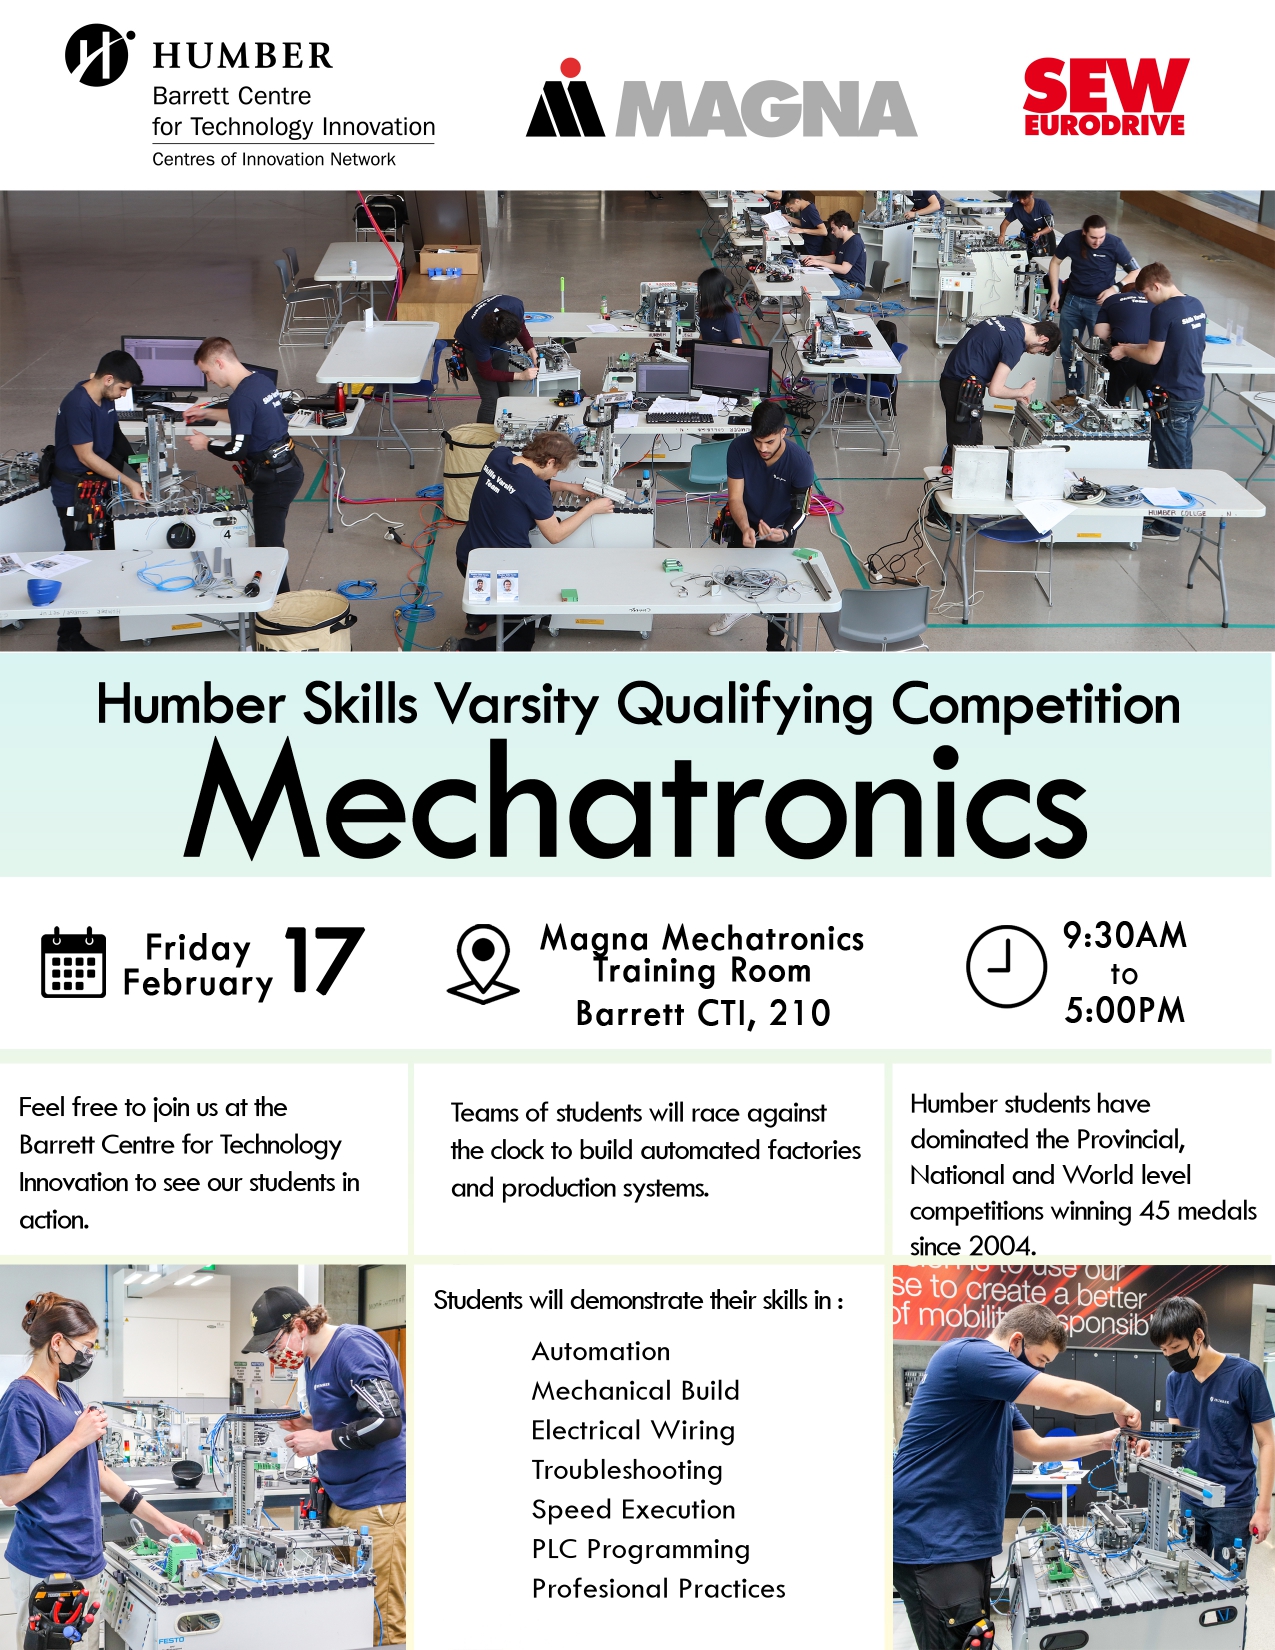 Room of students competing in a mechatronics competition